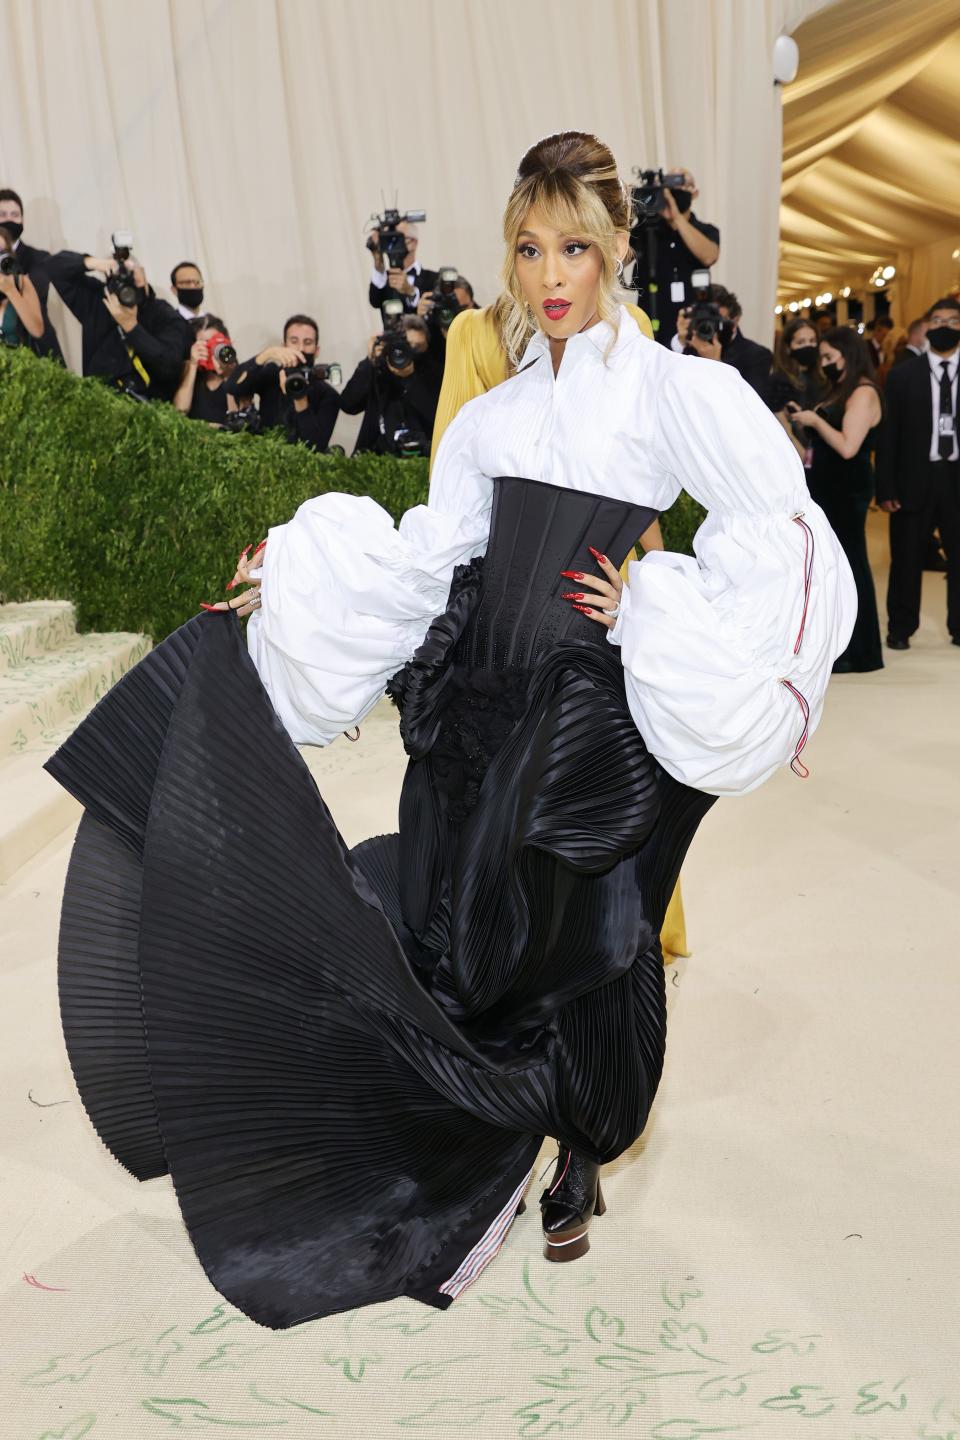 MJ Rodriguez attends the 2021 Met Gala.